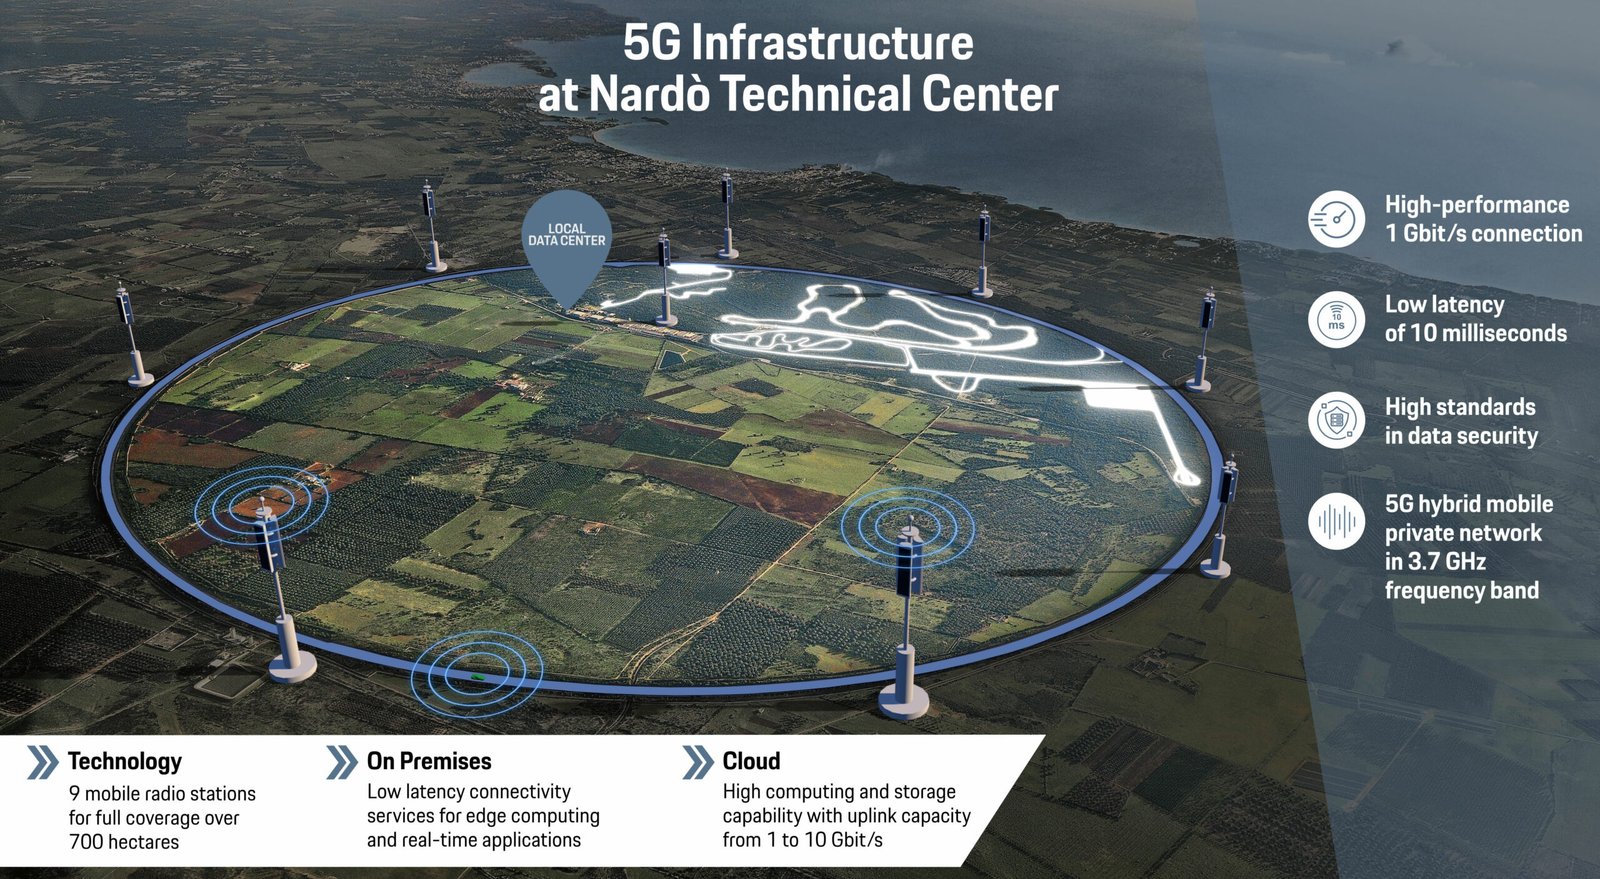 Europe's first hybrid private 5G mobile network in the Nardo Technical Center